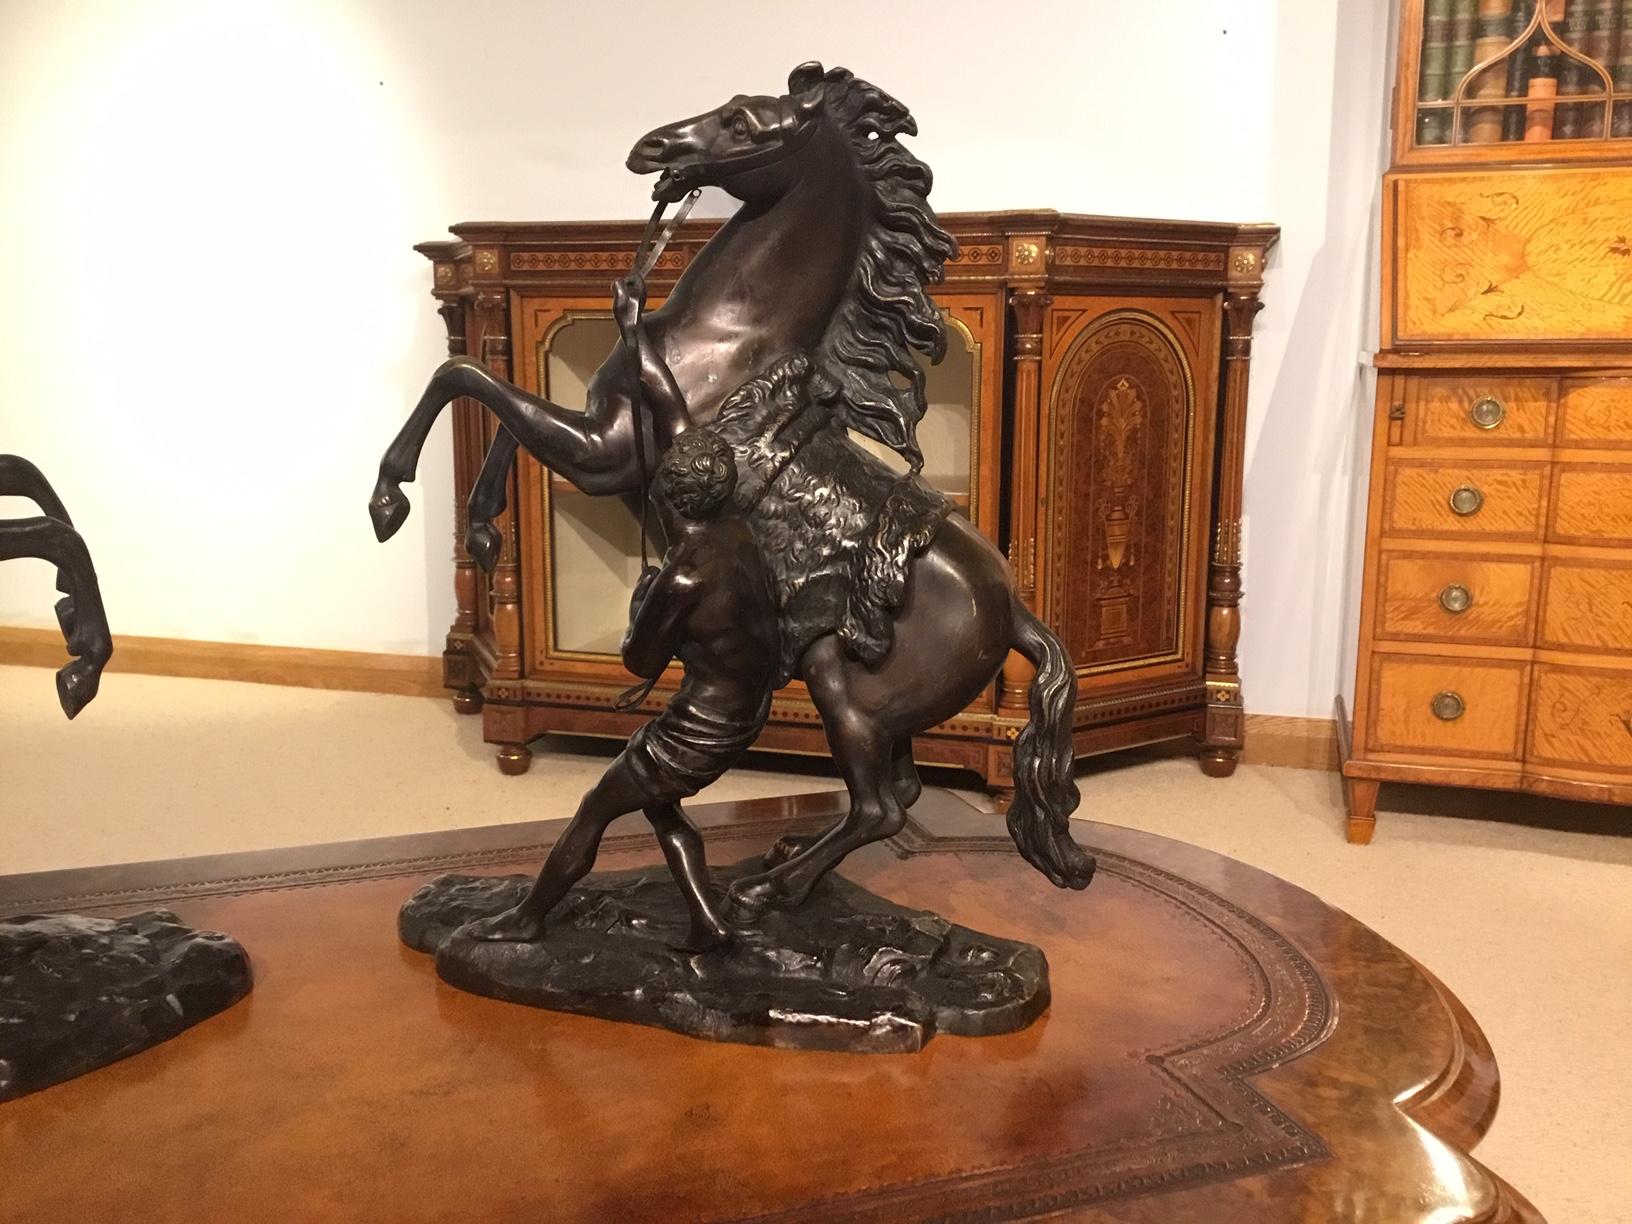 A pair of French Classical 19th century bronze Marley horses after Coustou depicting rearing horses being restrained by a groom. These are 19th Century copies after the antique circa 1880

Dimensions: 15